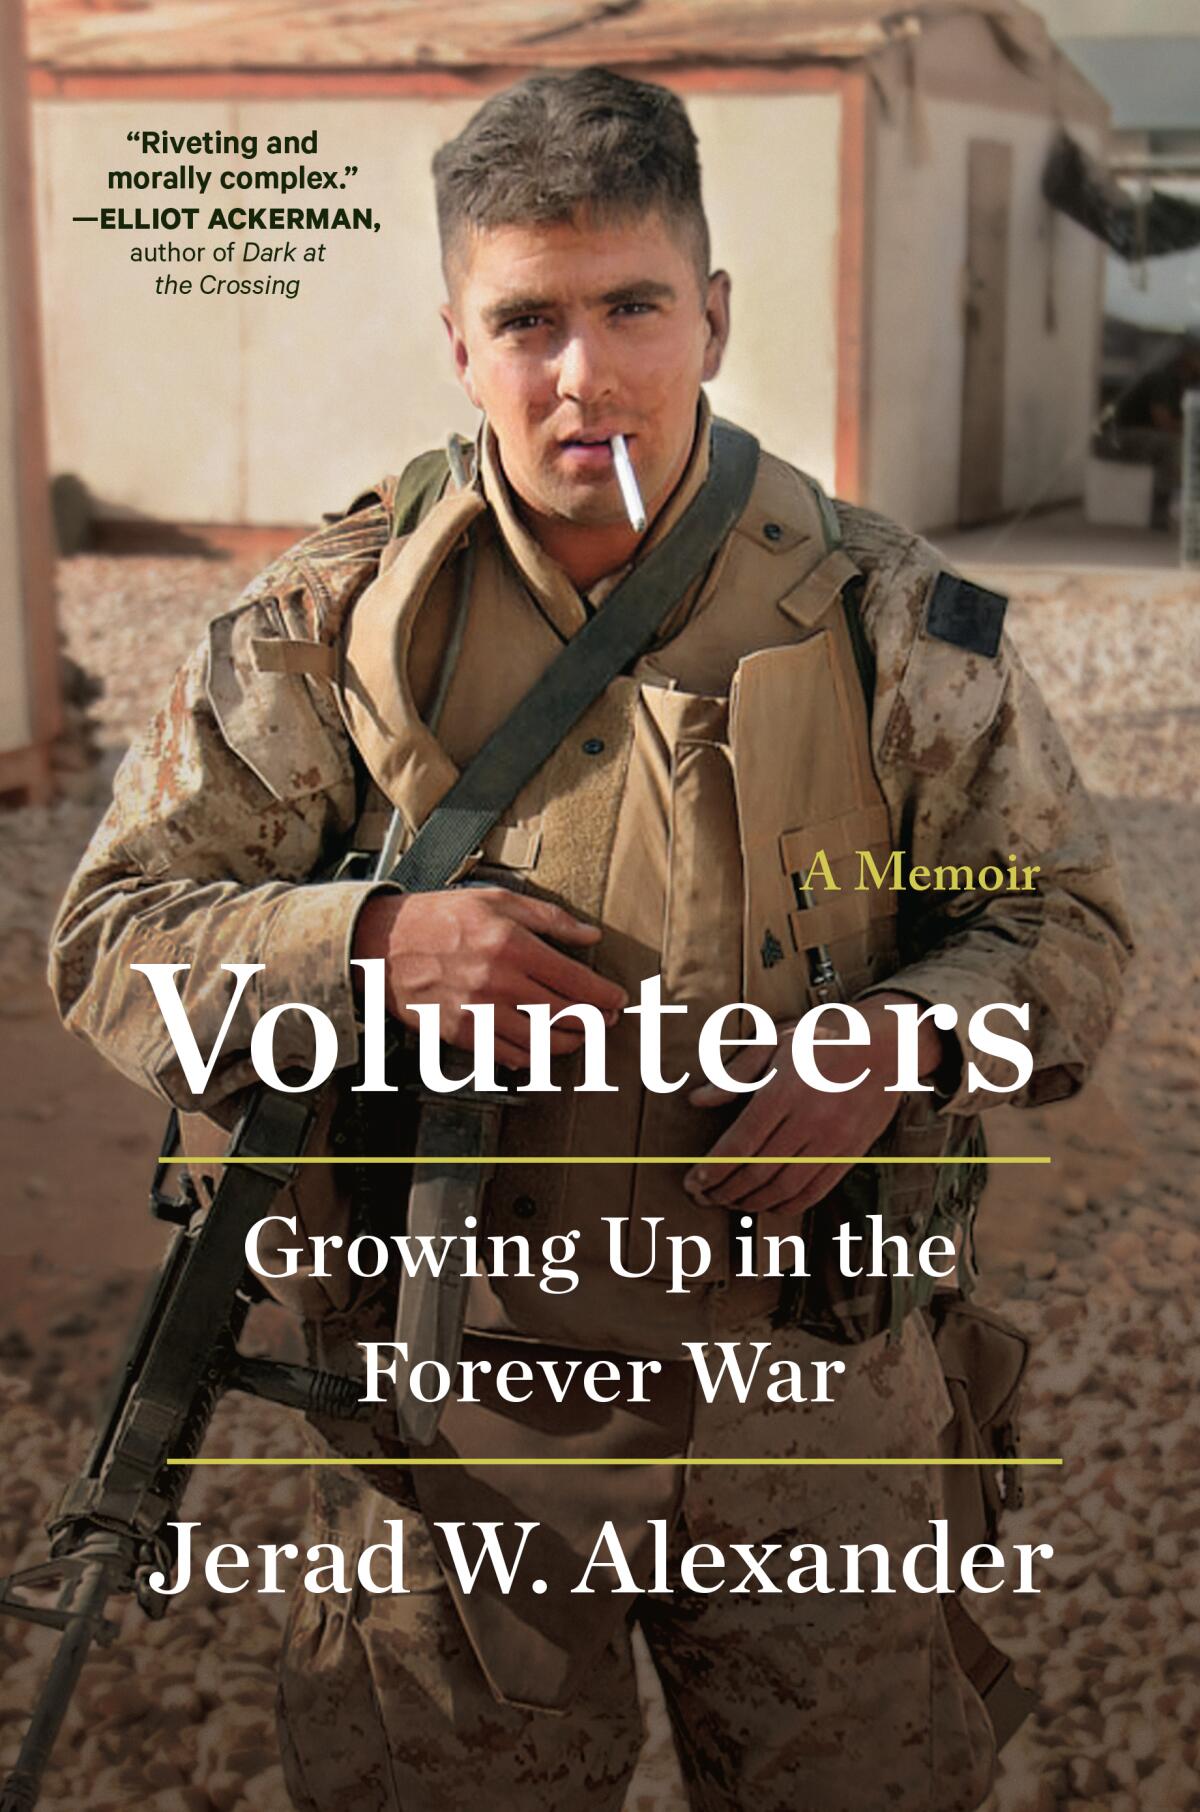 Jerad W. Alexander in his Marine uniform on the cover of "Volunteers: Growing Up in the Forever War."